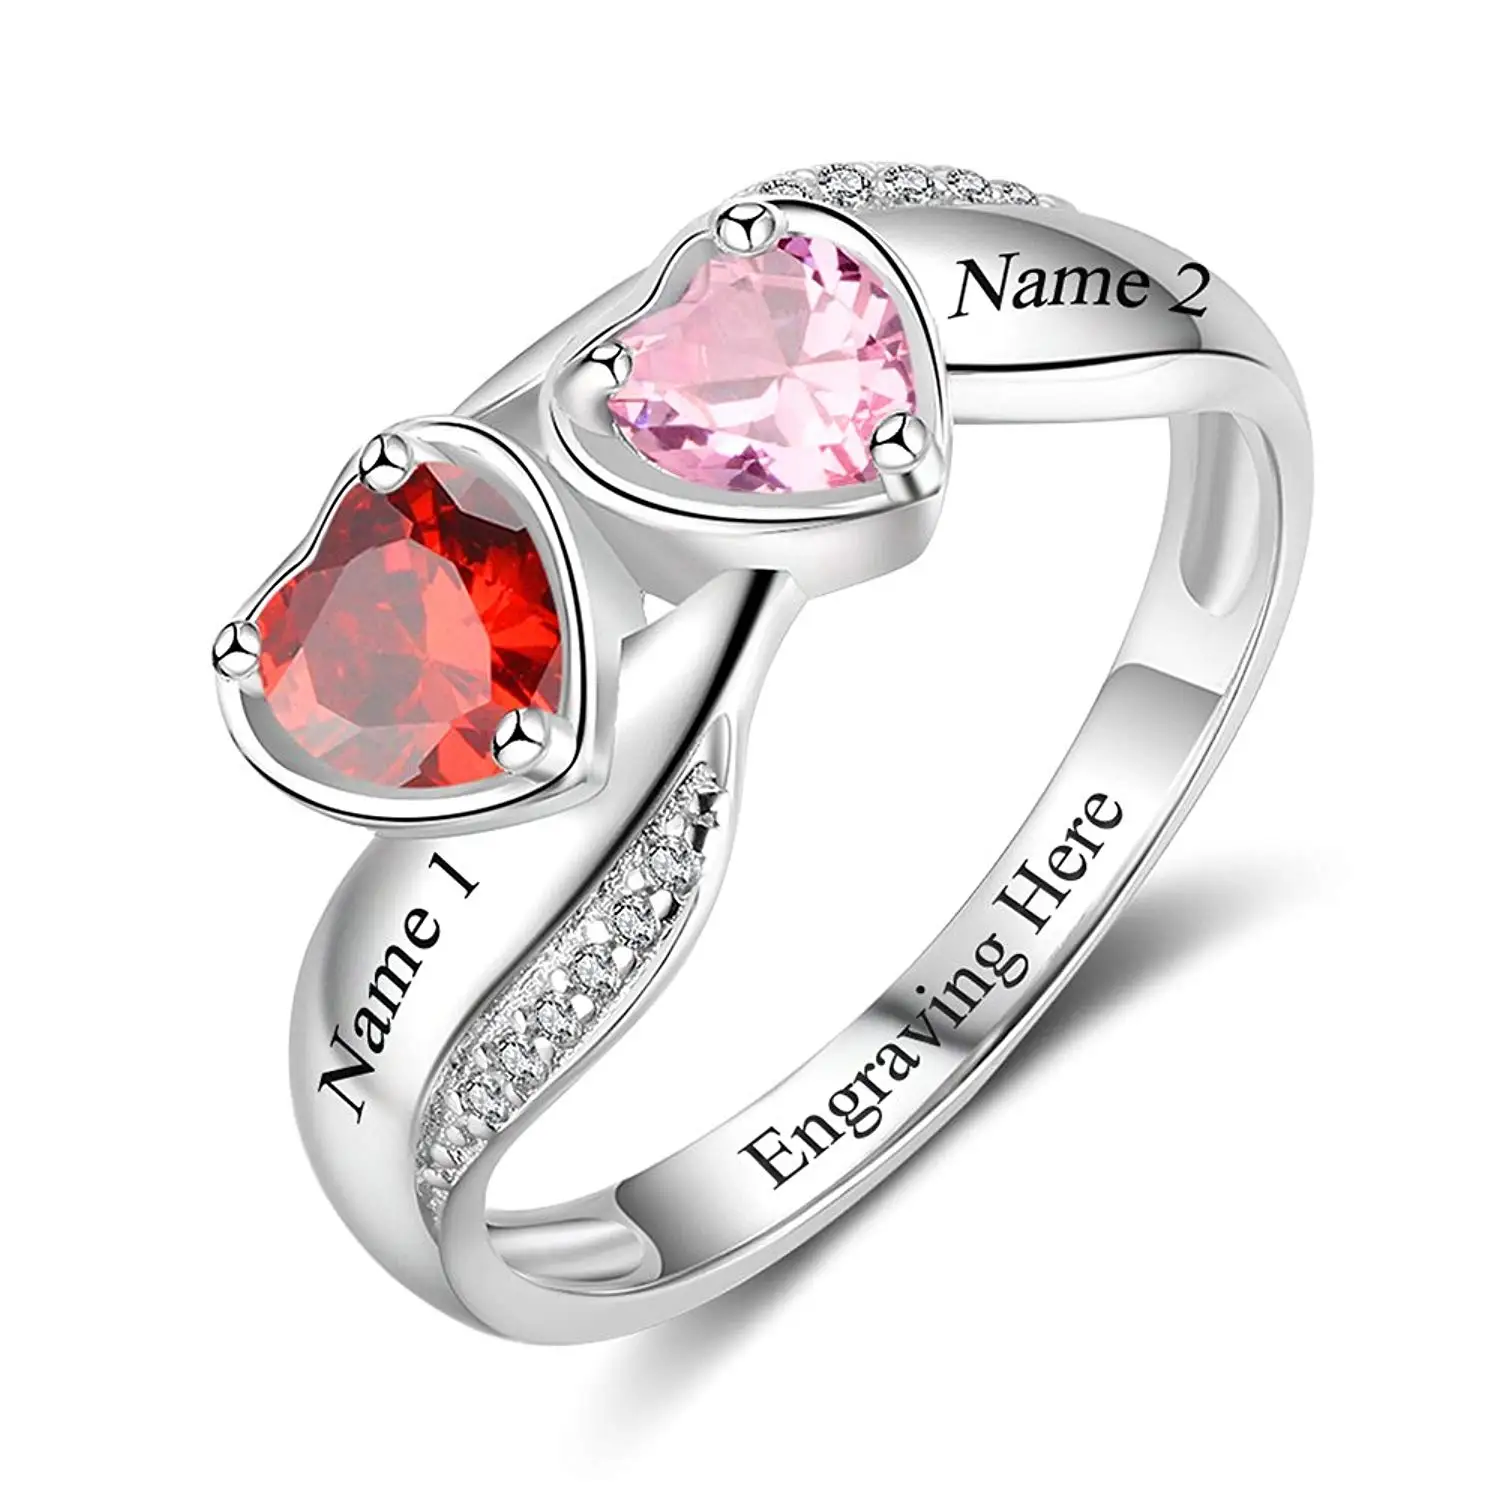 Buy To I Love Promise Rings For Her Engraved 2 Names 2 Simulated Birthstones Rings Engagement Rings For Women Personalized And Customized In Cheap Price On Alibaba Com